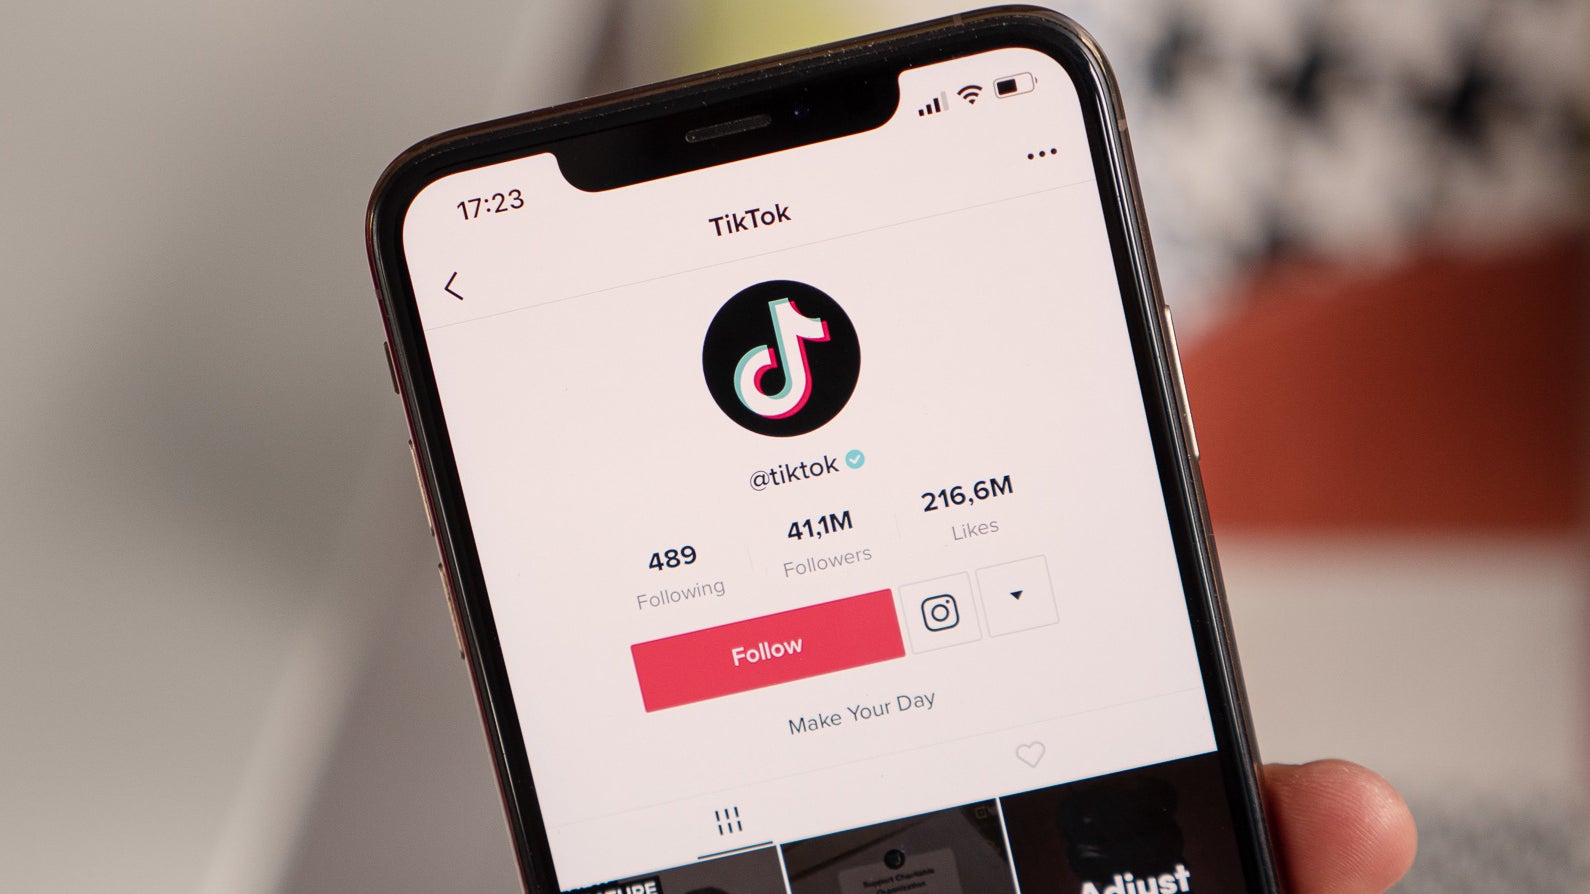 TikTok working on extending its video duration limit to 5 minutes (or